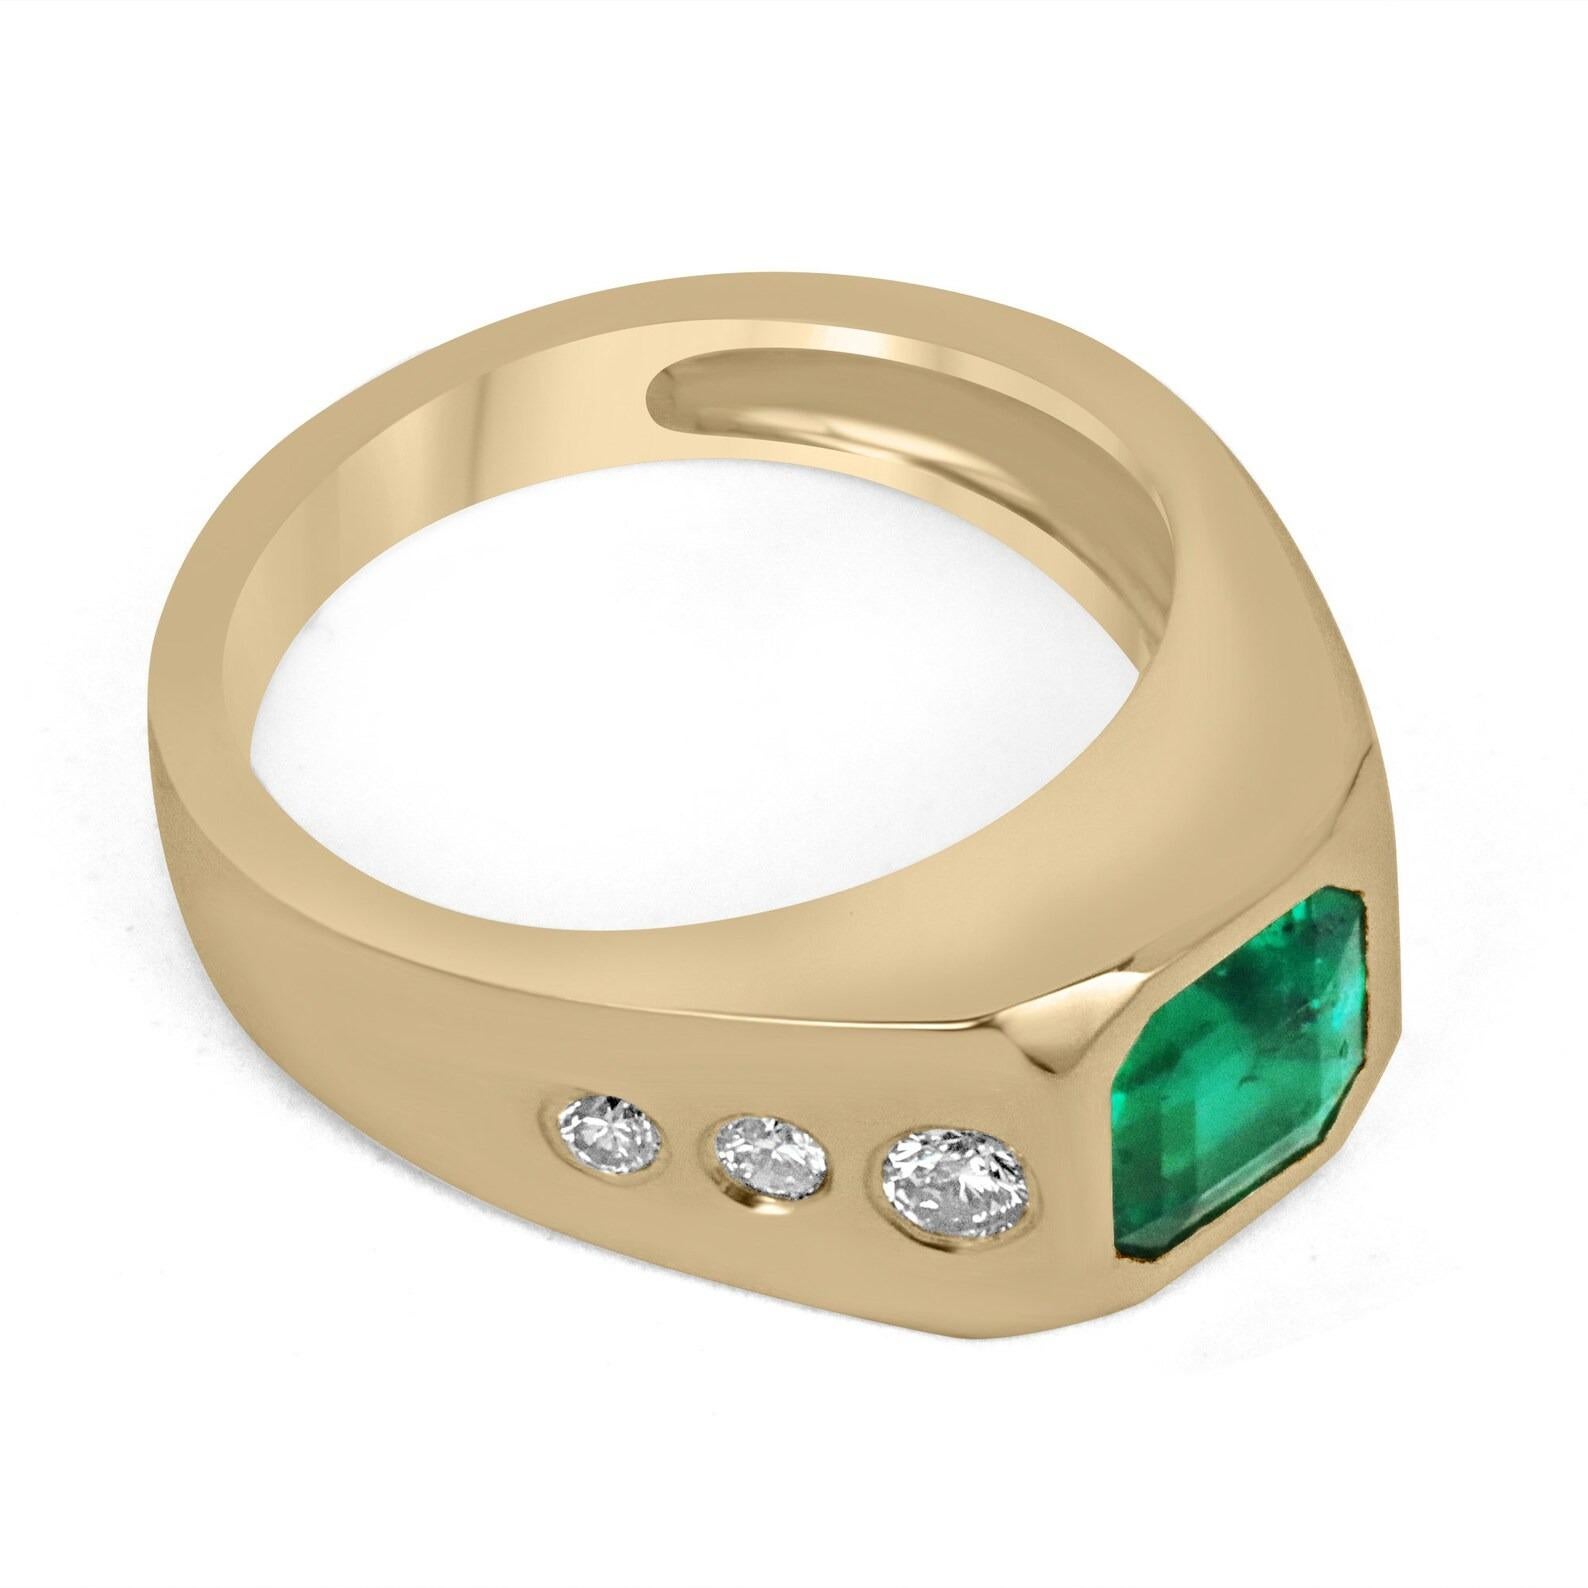 A sophisticated emerald and diamond unisex statement ring. This dapper piece features a remarkable natural AAA quality Colombian emerald, Asscher cut. Fully faceted, this gemstone displays excellent shine and a vivid, dark green color with excellent